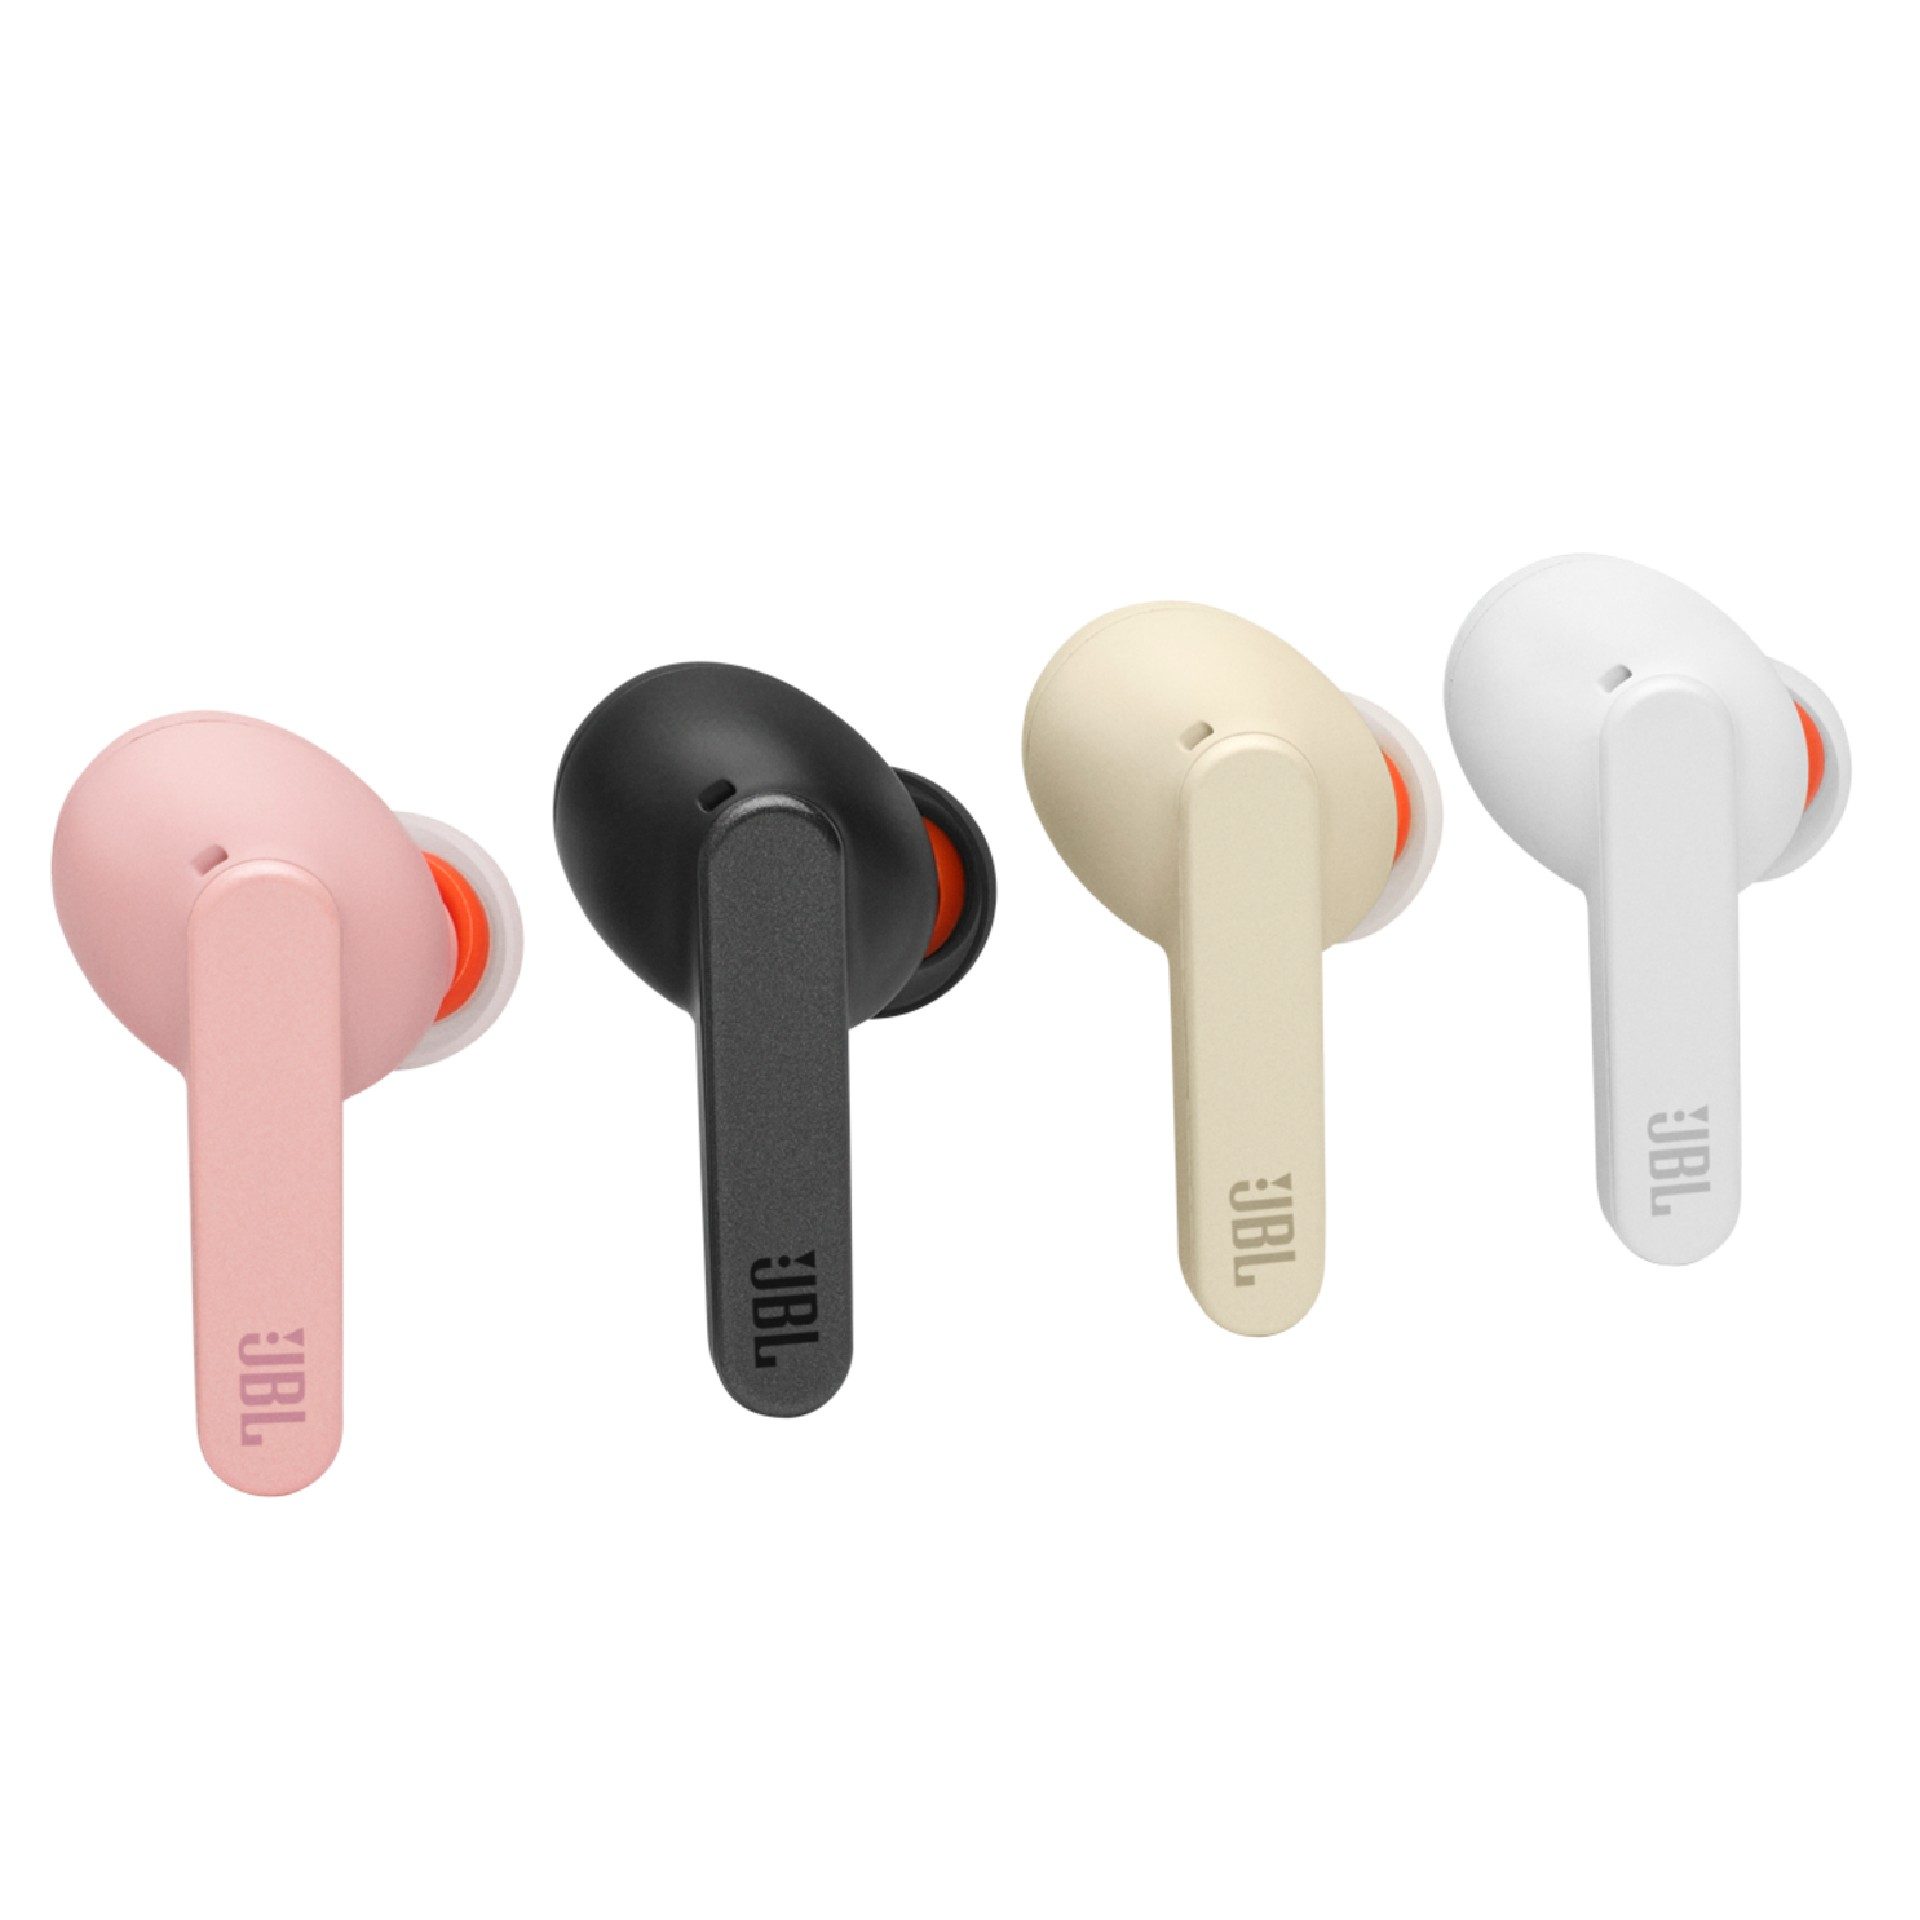 Price, features: JBL’s 2021 PH lineup of sports and lifestyle headphones